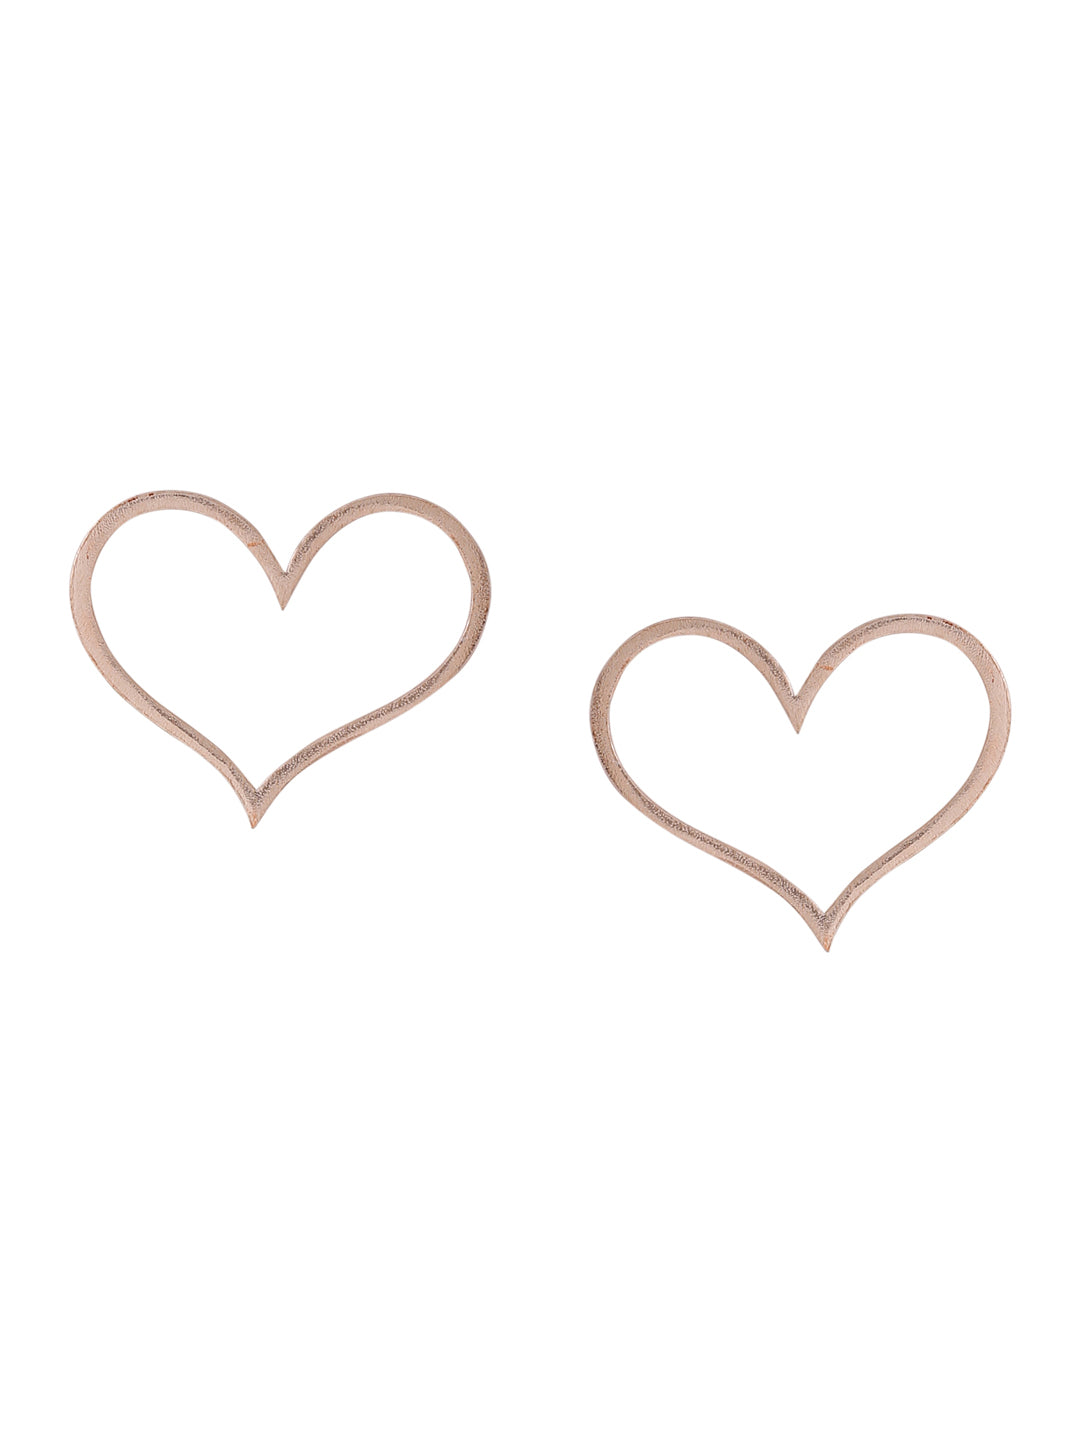 Happy Heart Studs - Rose Gold